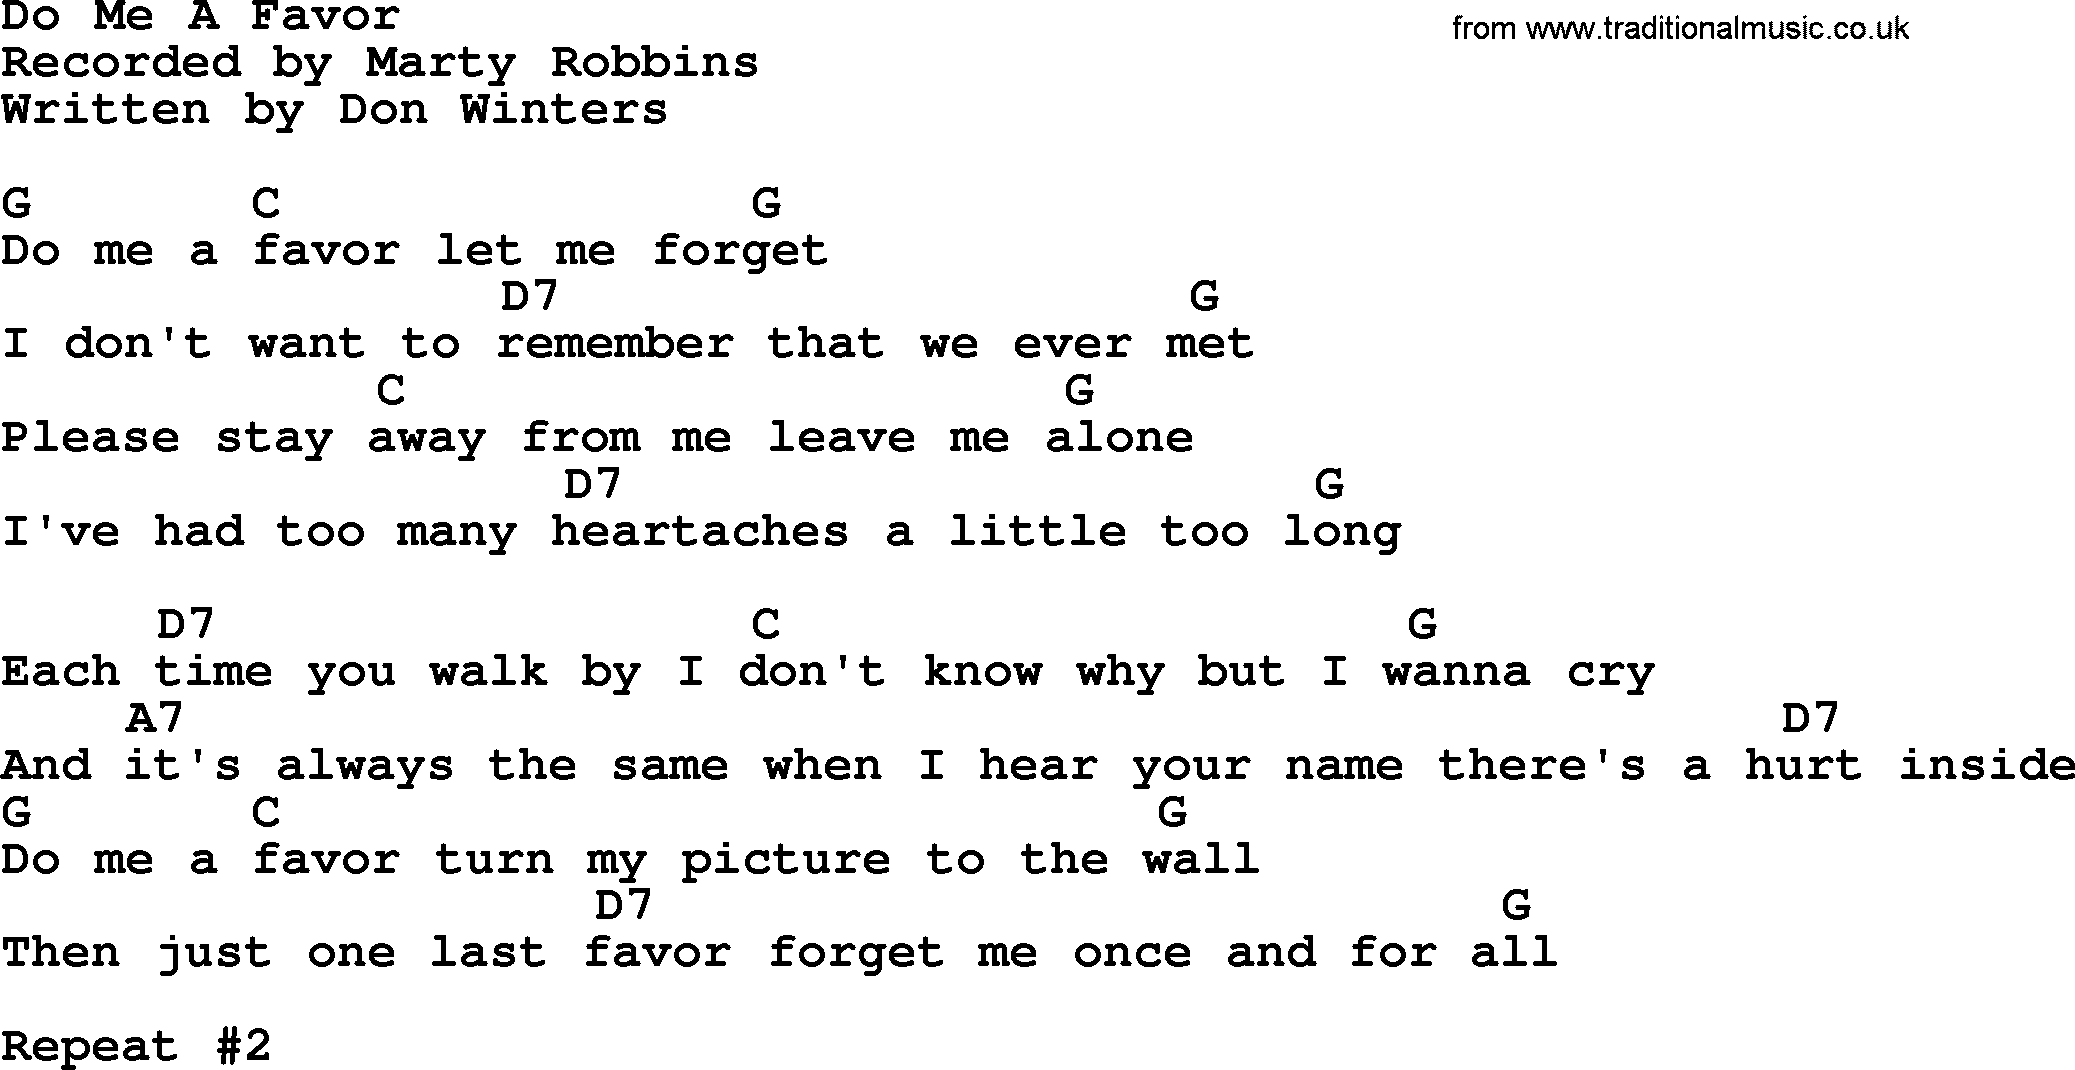 Marty Robbins song: Do Me A Favor, lyrics and chords